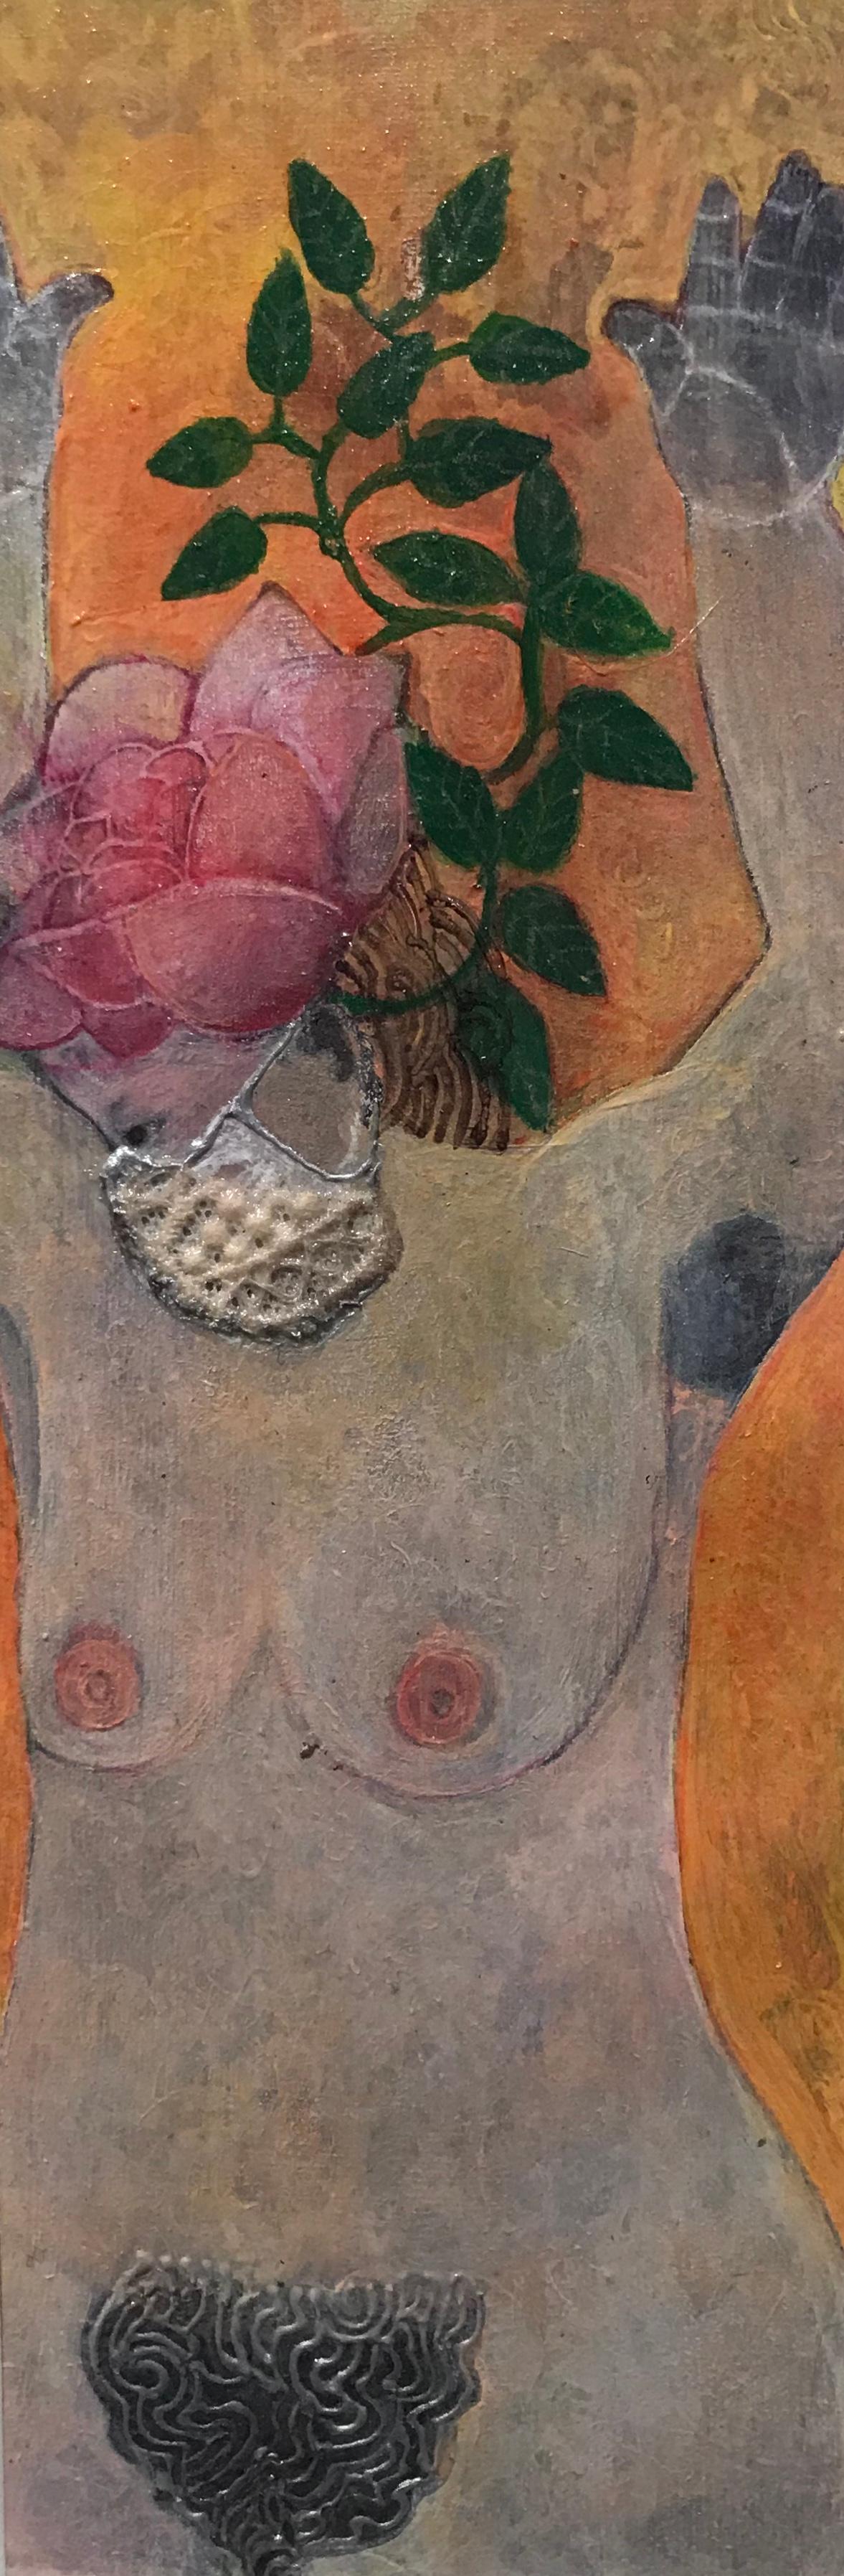 Deirdre O'Connell Nude Painting - Masked Rose, mixed media portrait of woman with headpiece, orange and pink